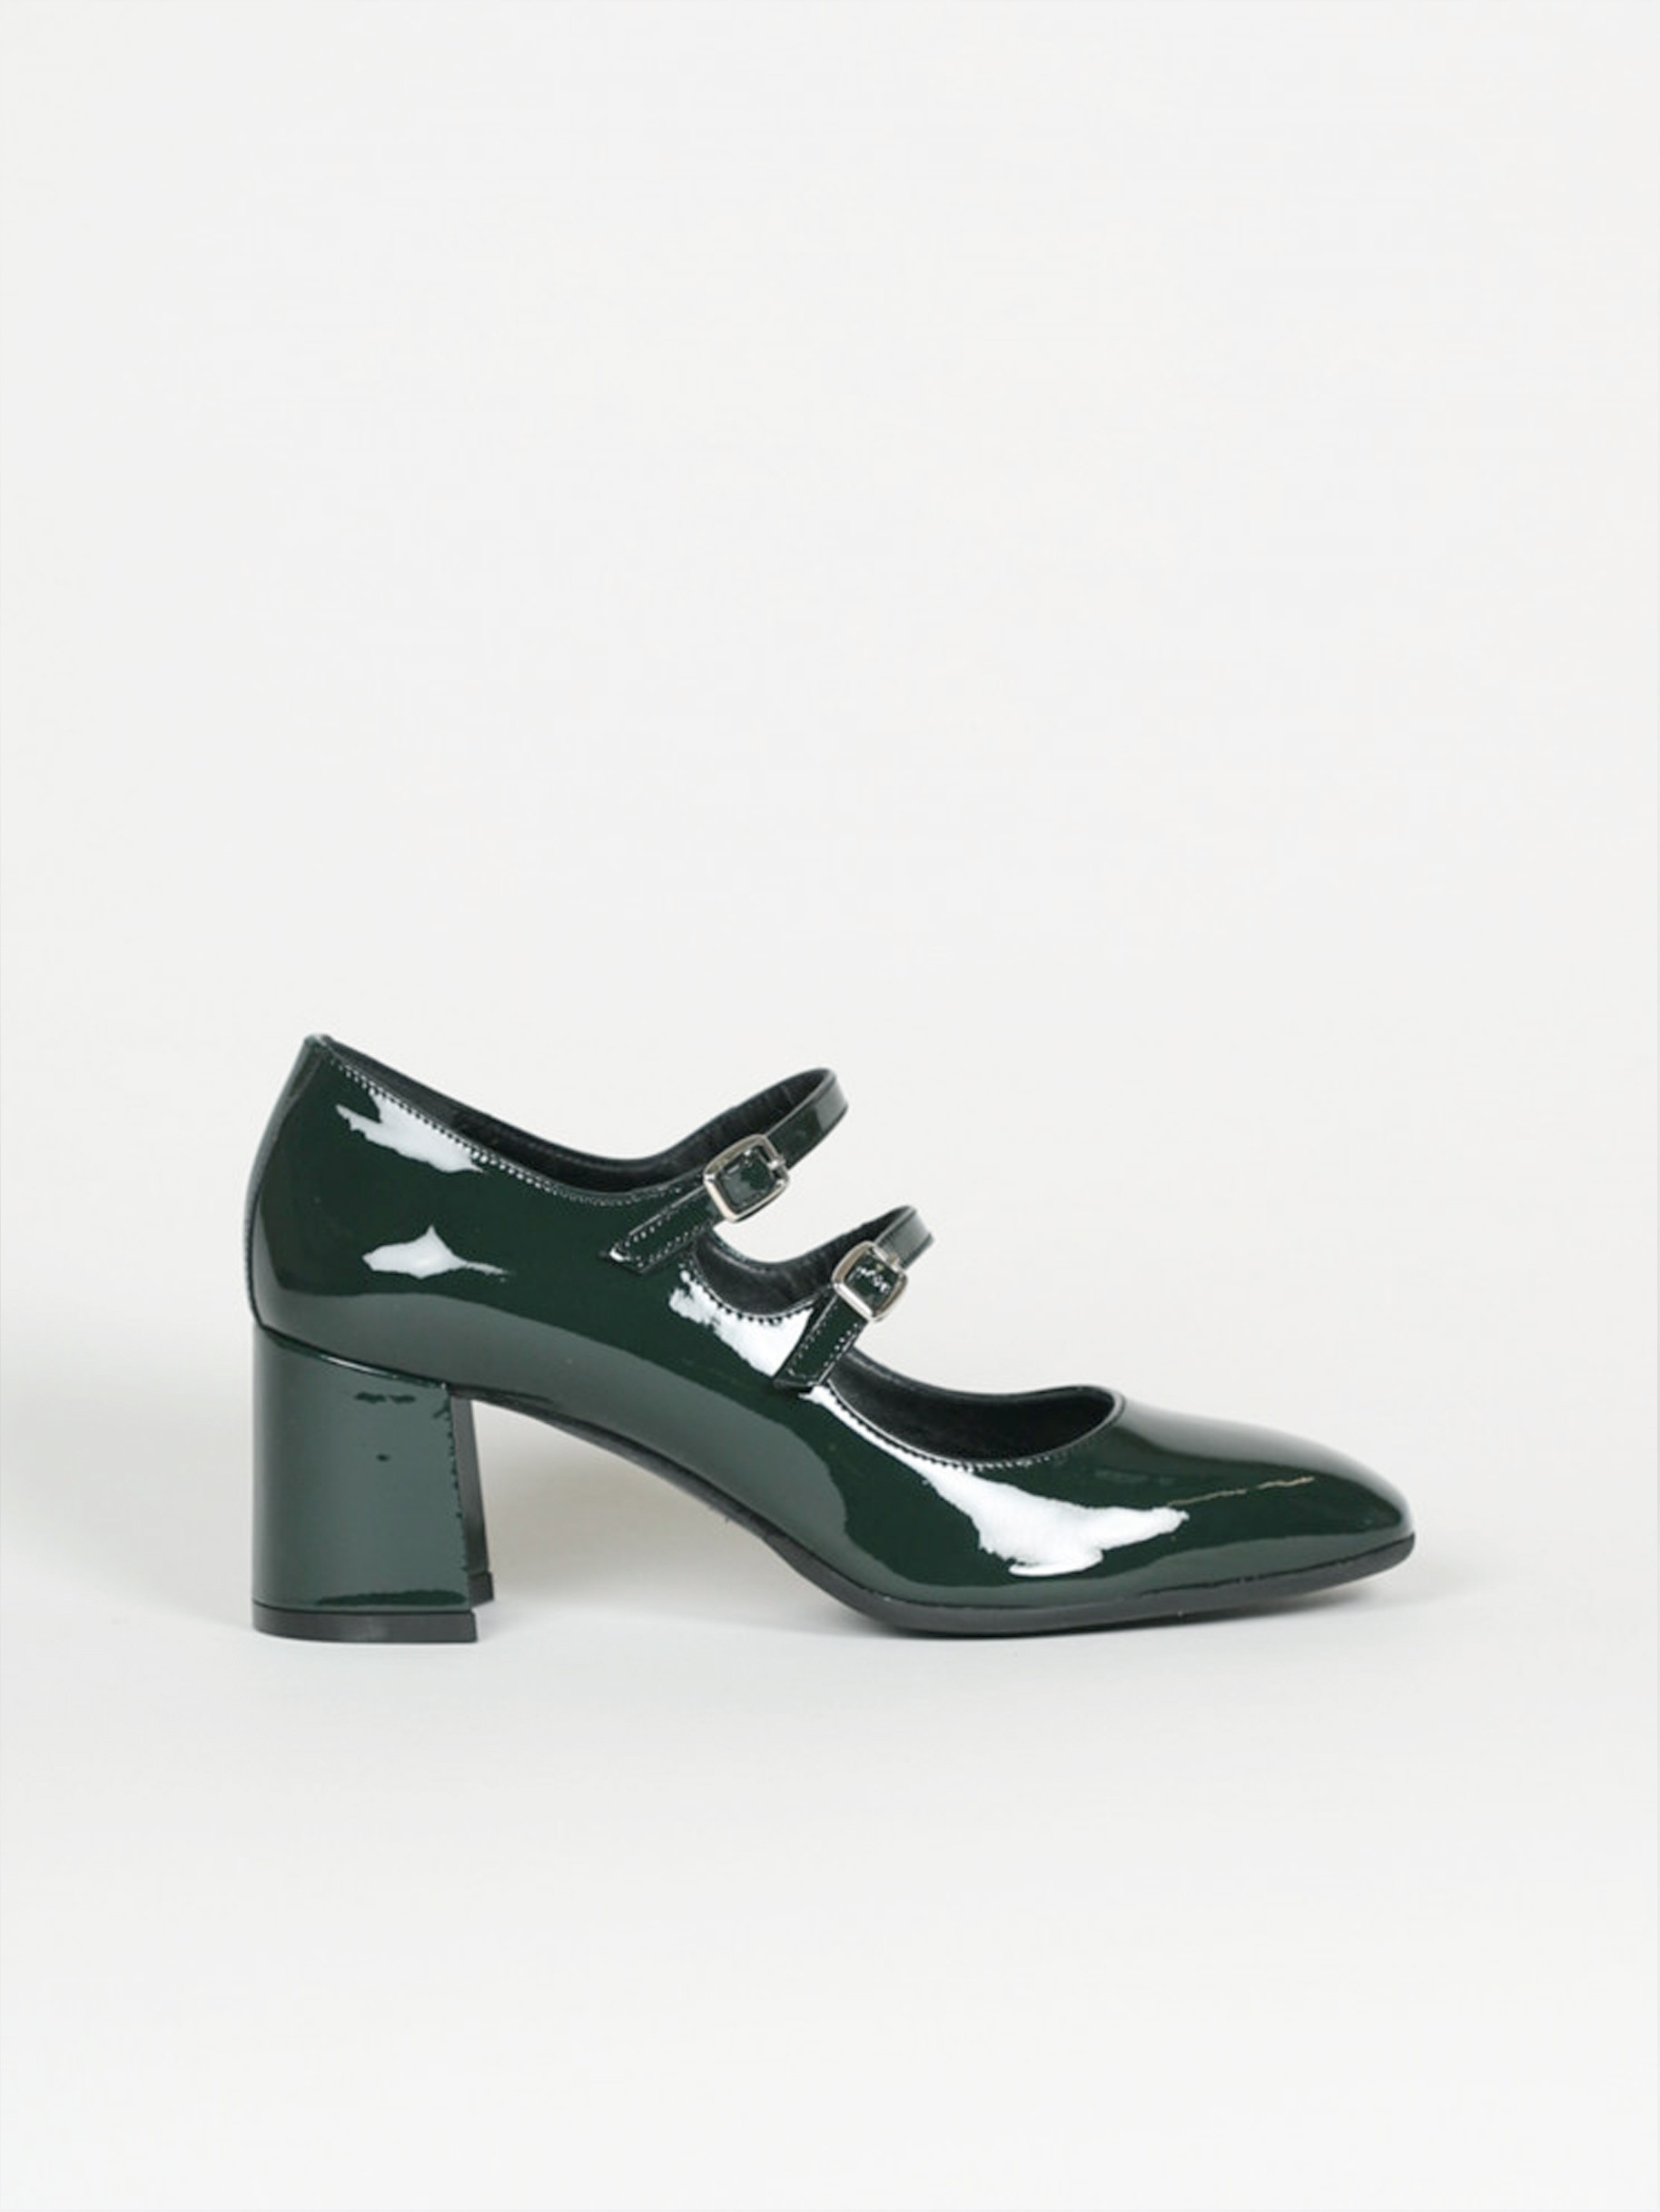 Green patent leather Mary Janes